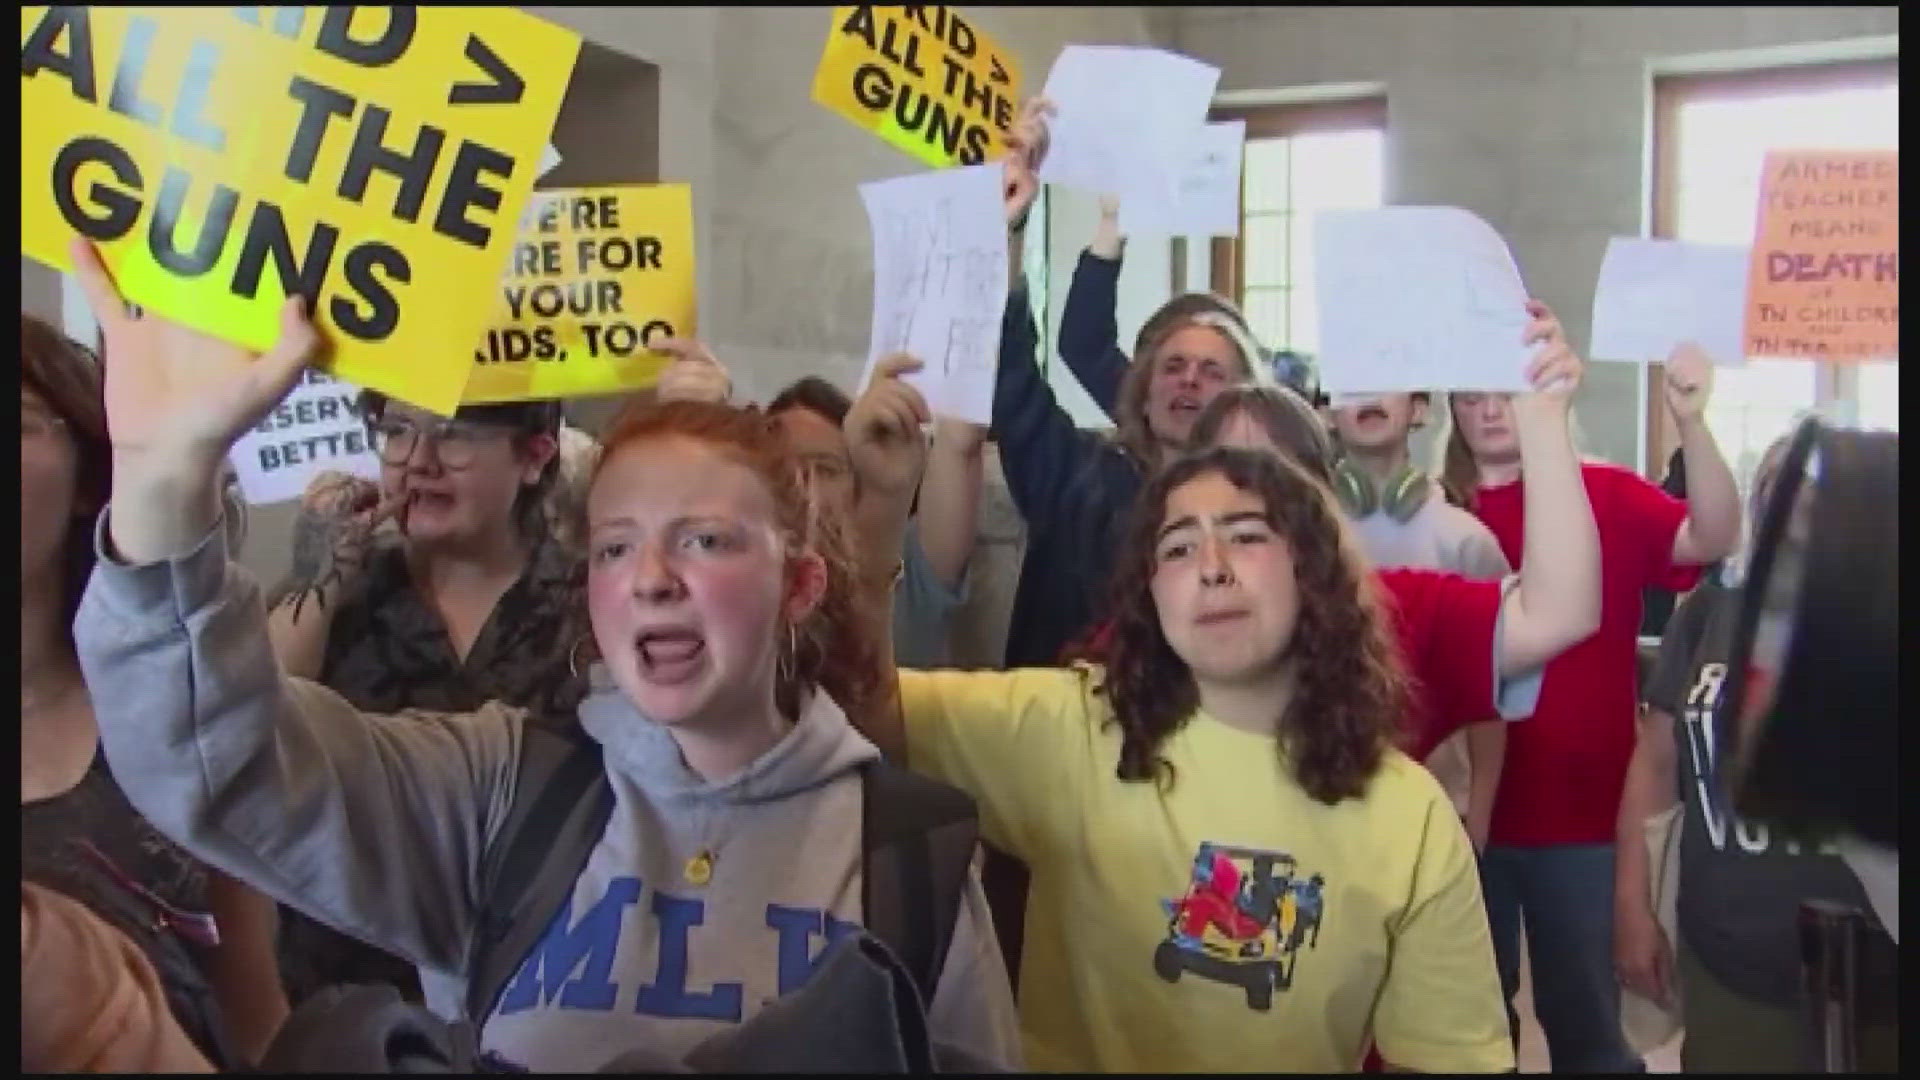 Students gathered at the Tennessee state capitol to protest a bill allowing teachers to carry guns inside schools.